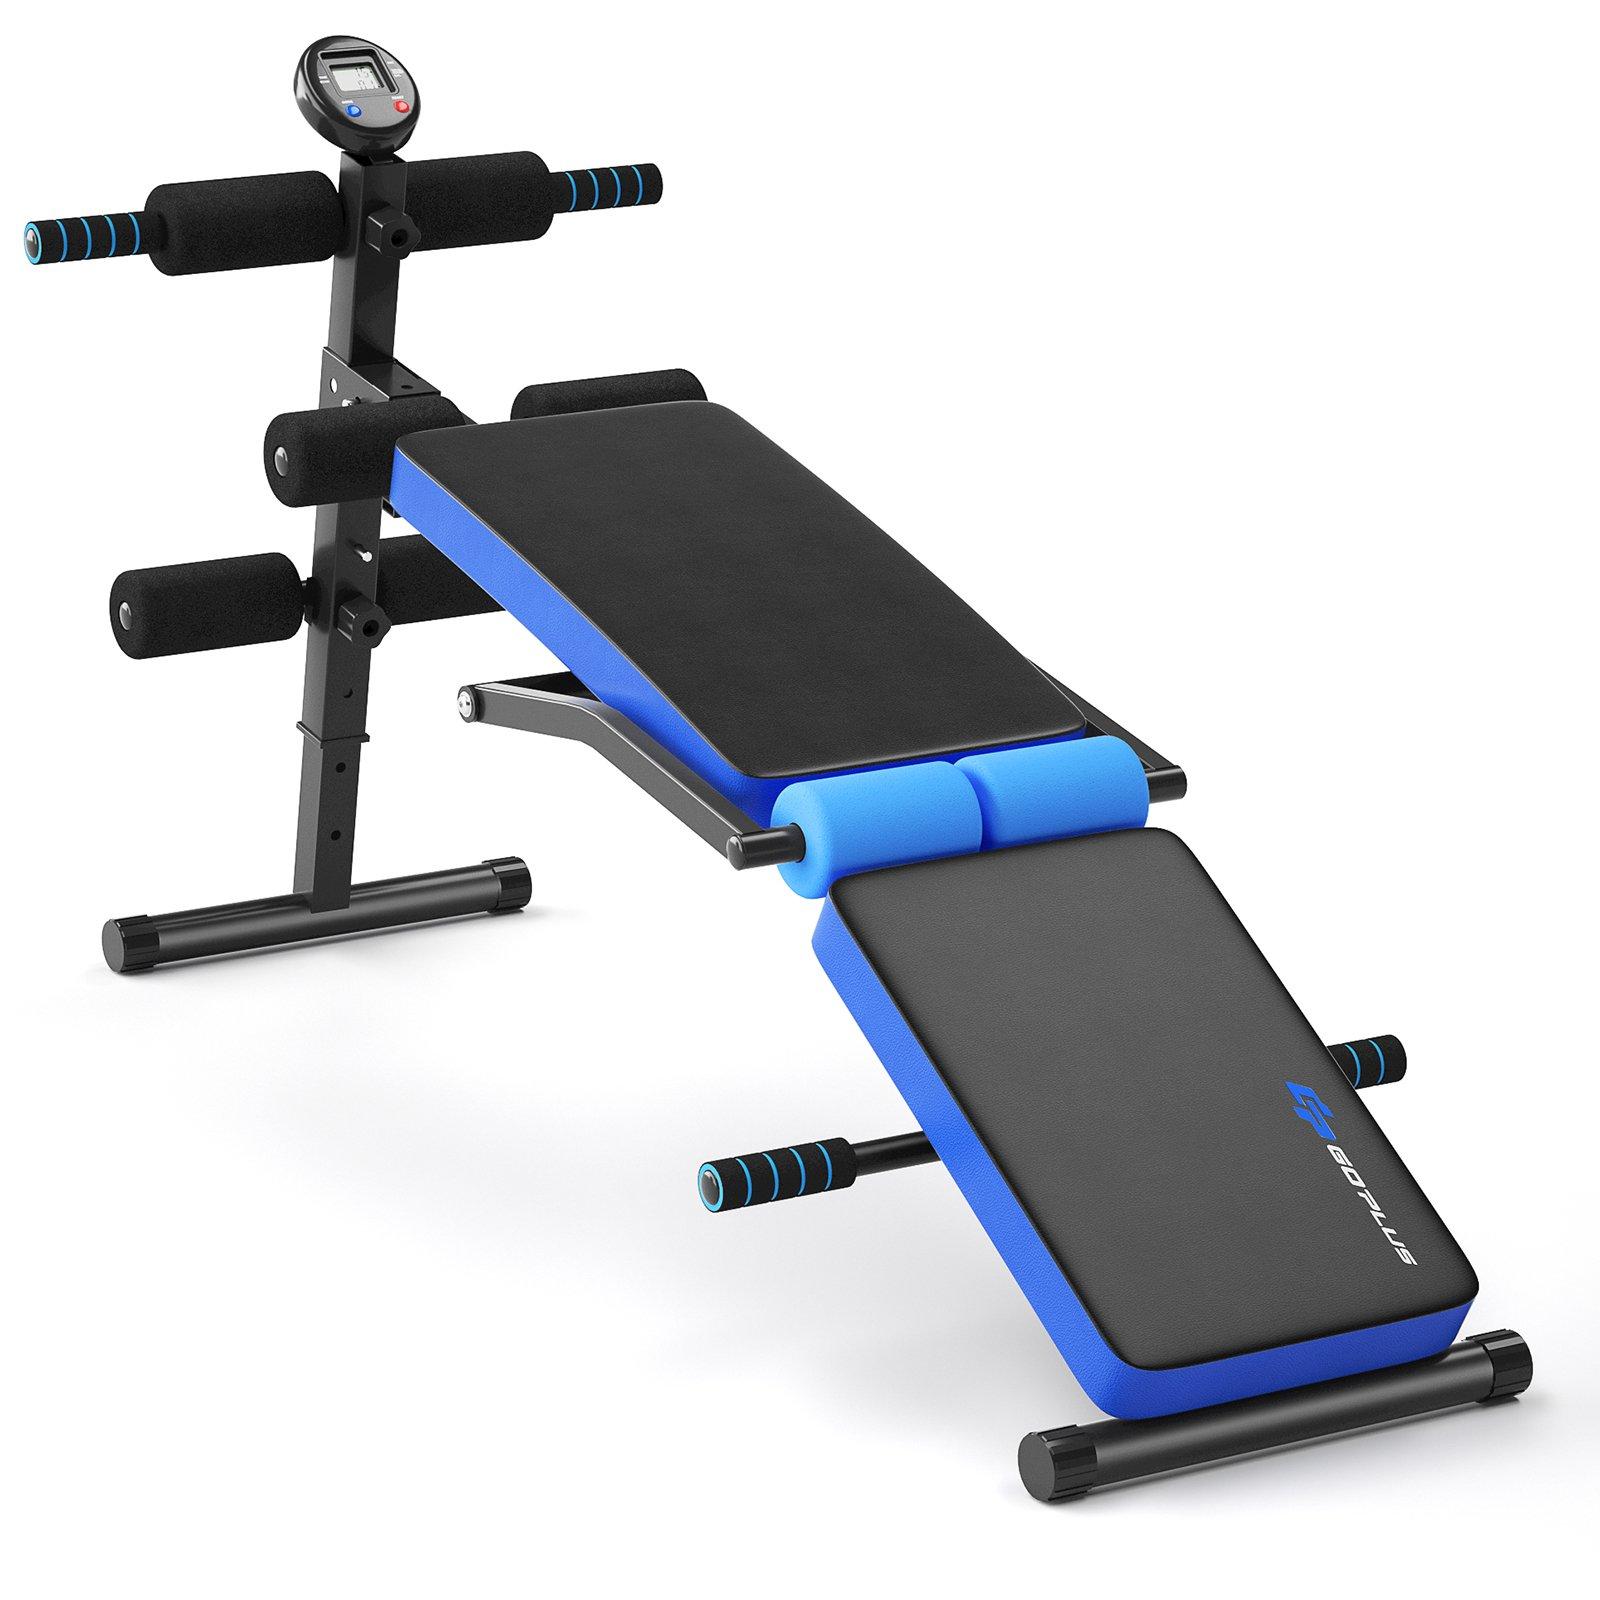 Adjustable Weight Bench Foldable Utility Sit Up Bench for Full Body Workout